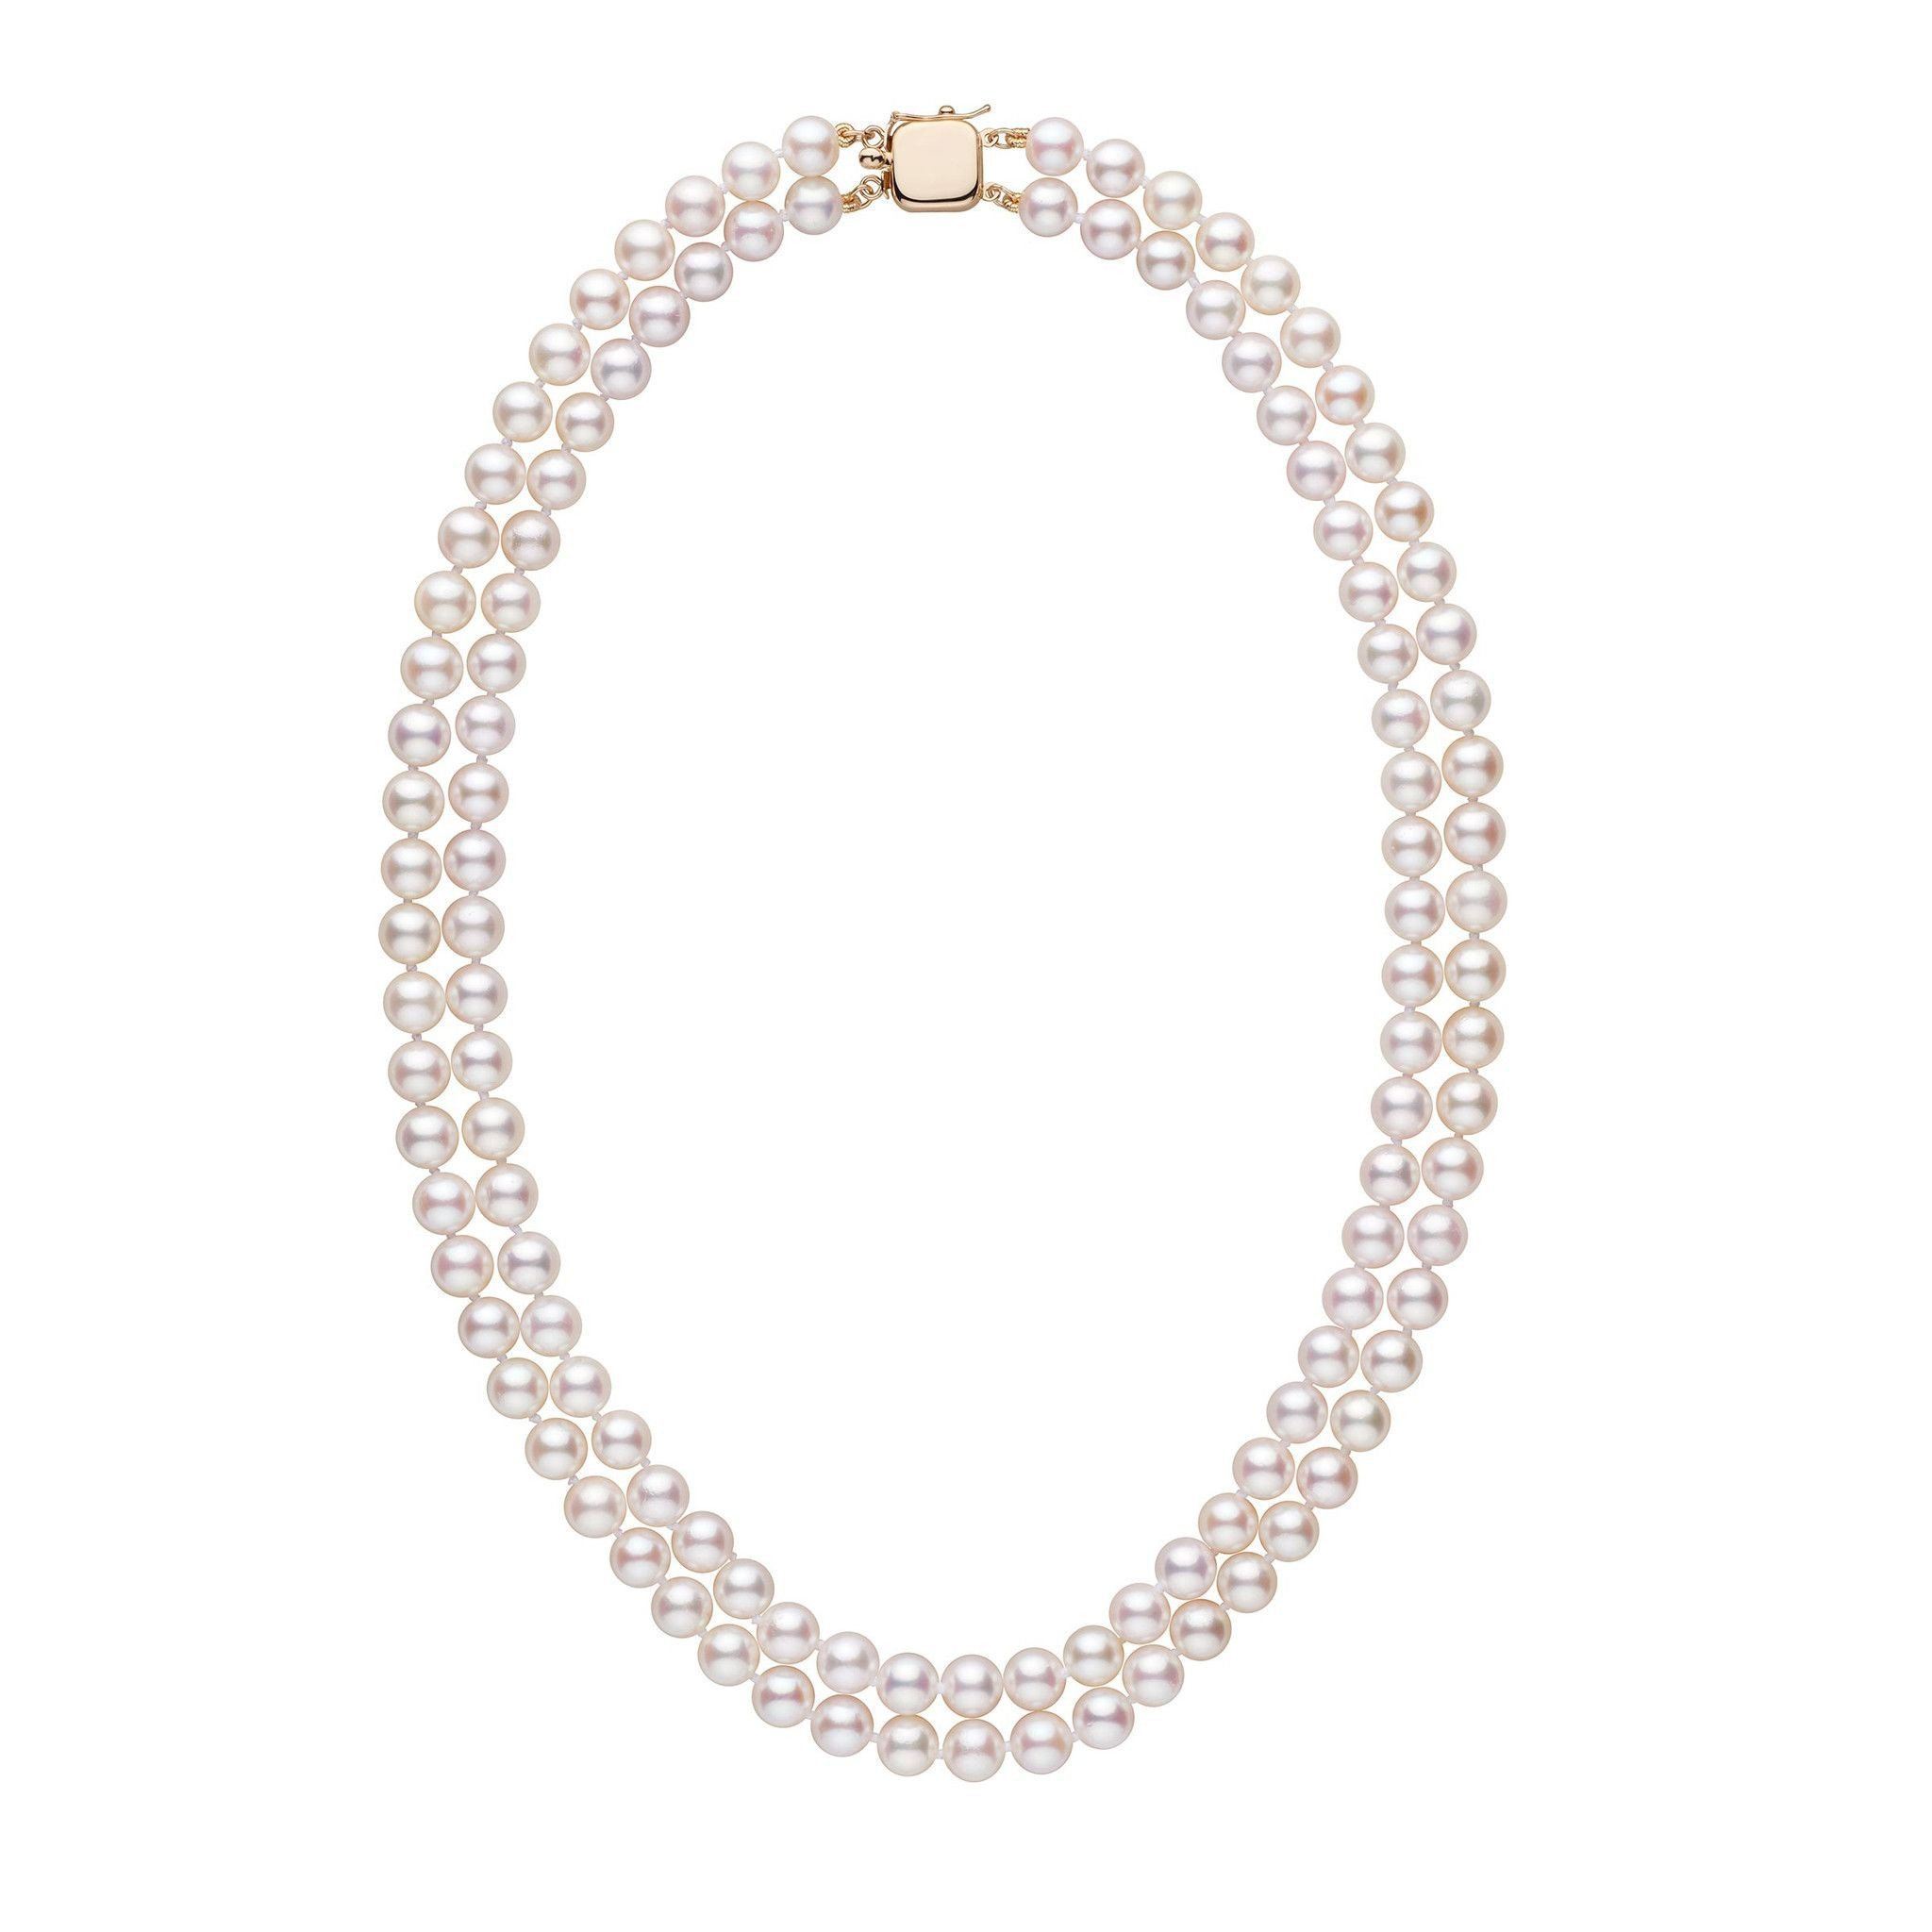 6.5-7.0 mm 18-inch Double-Strand White Akoya AA+ Pearl Necklace